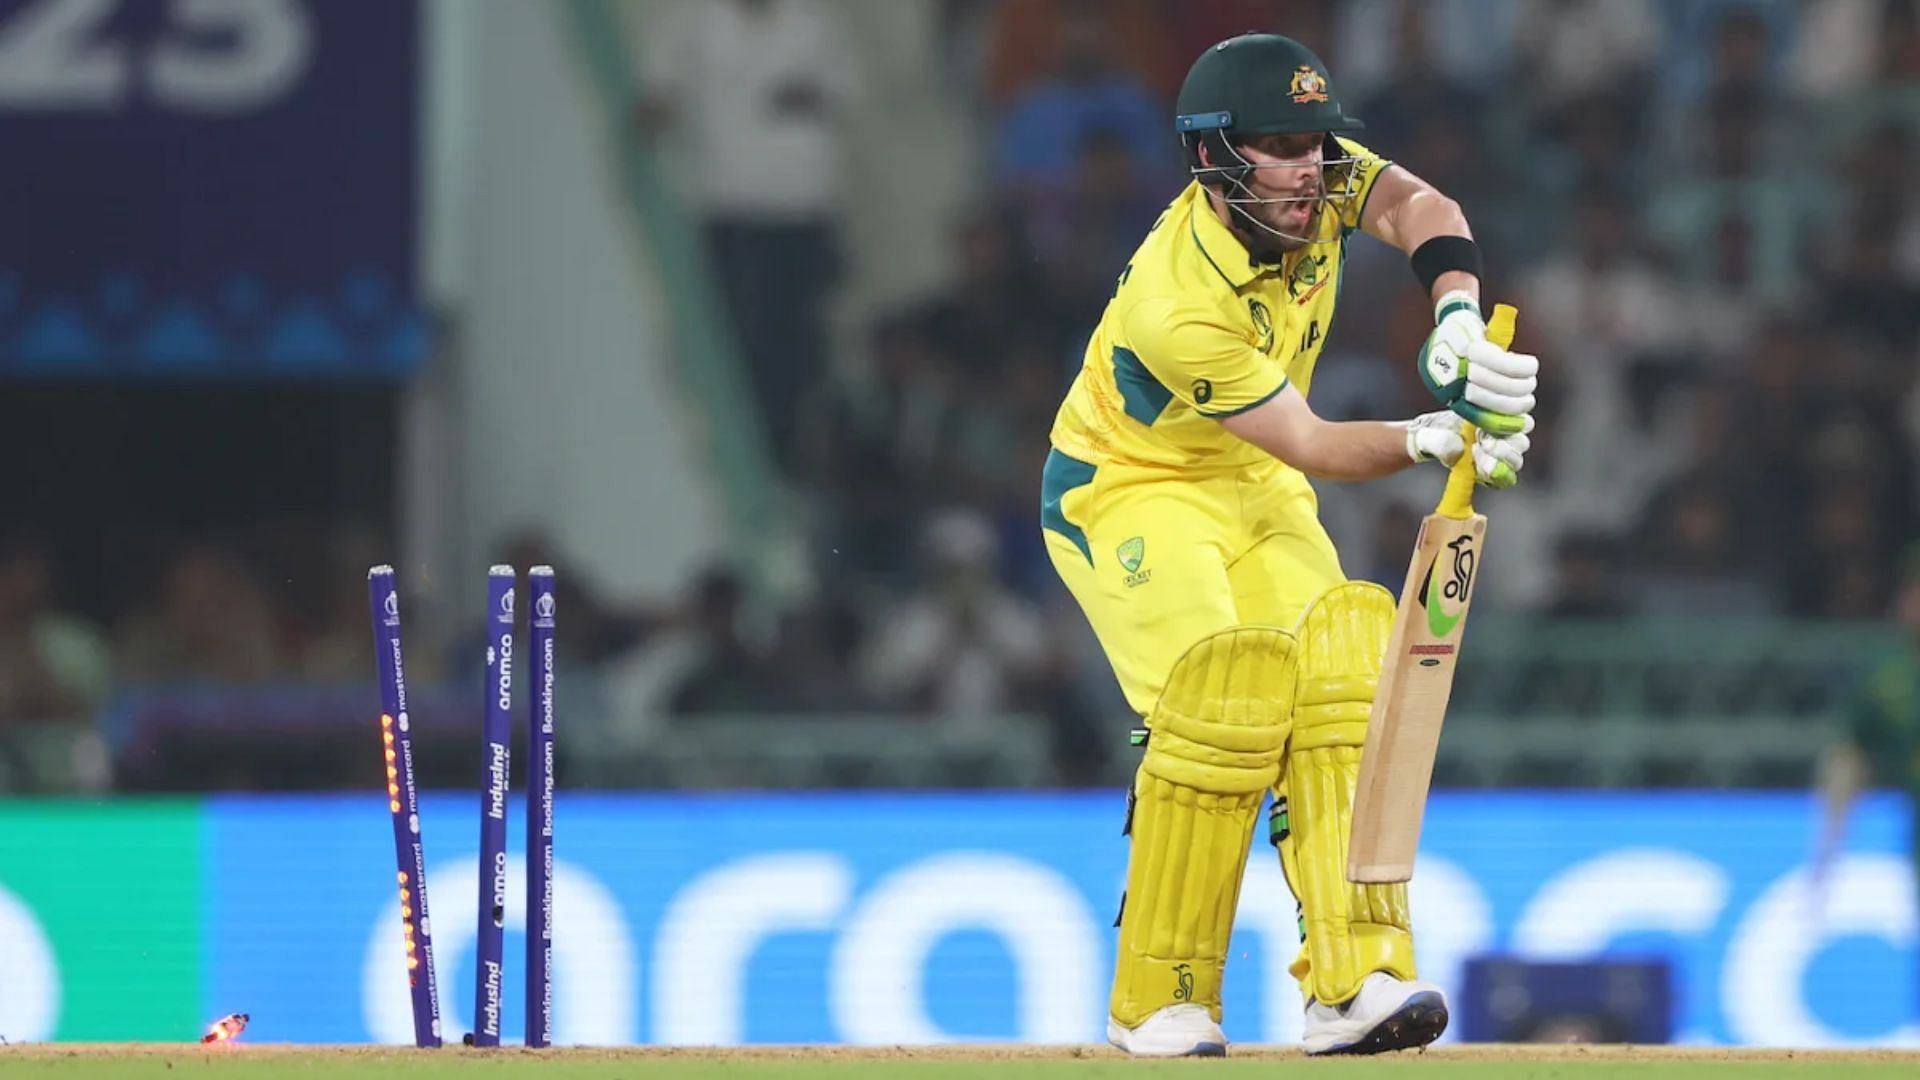 Josh Inglis edged Alex Carey out to become the first-choice wicket-keeper for Australia at this World Cup. (Image Courtesy: espncricinfo.com)